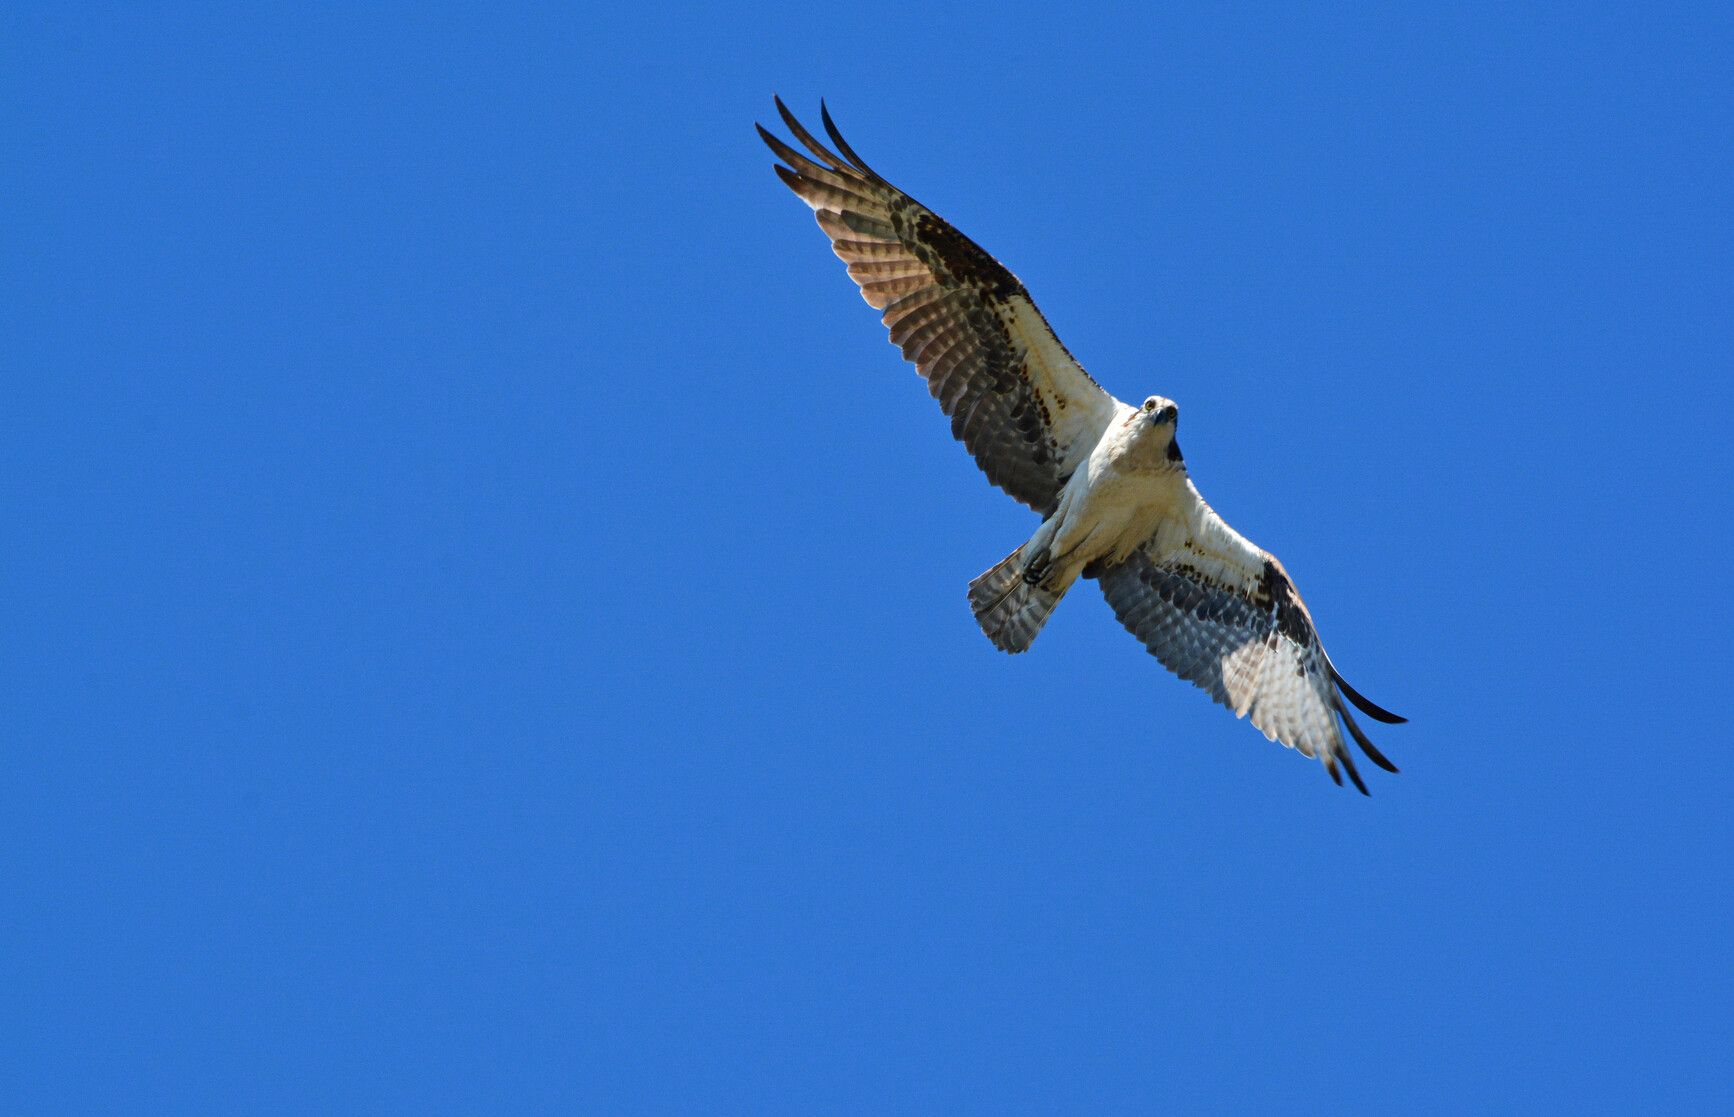 An osprey soars gracefully above Monck Park, keenly observing its surroundings with sharp eyes.&nbsp;